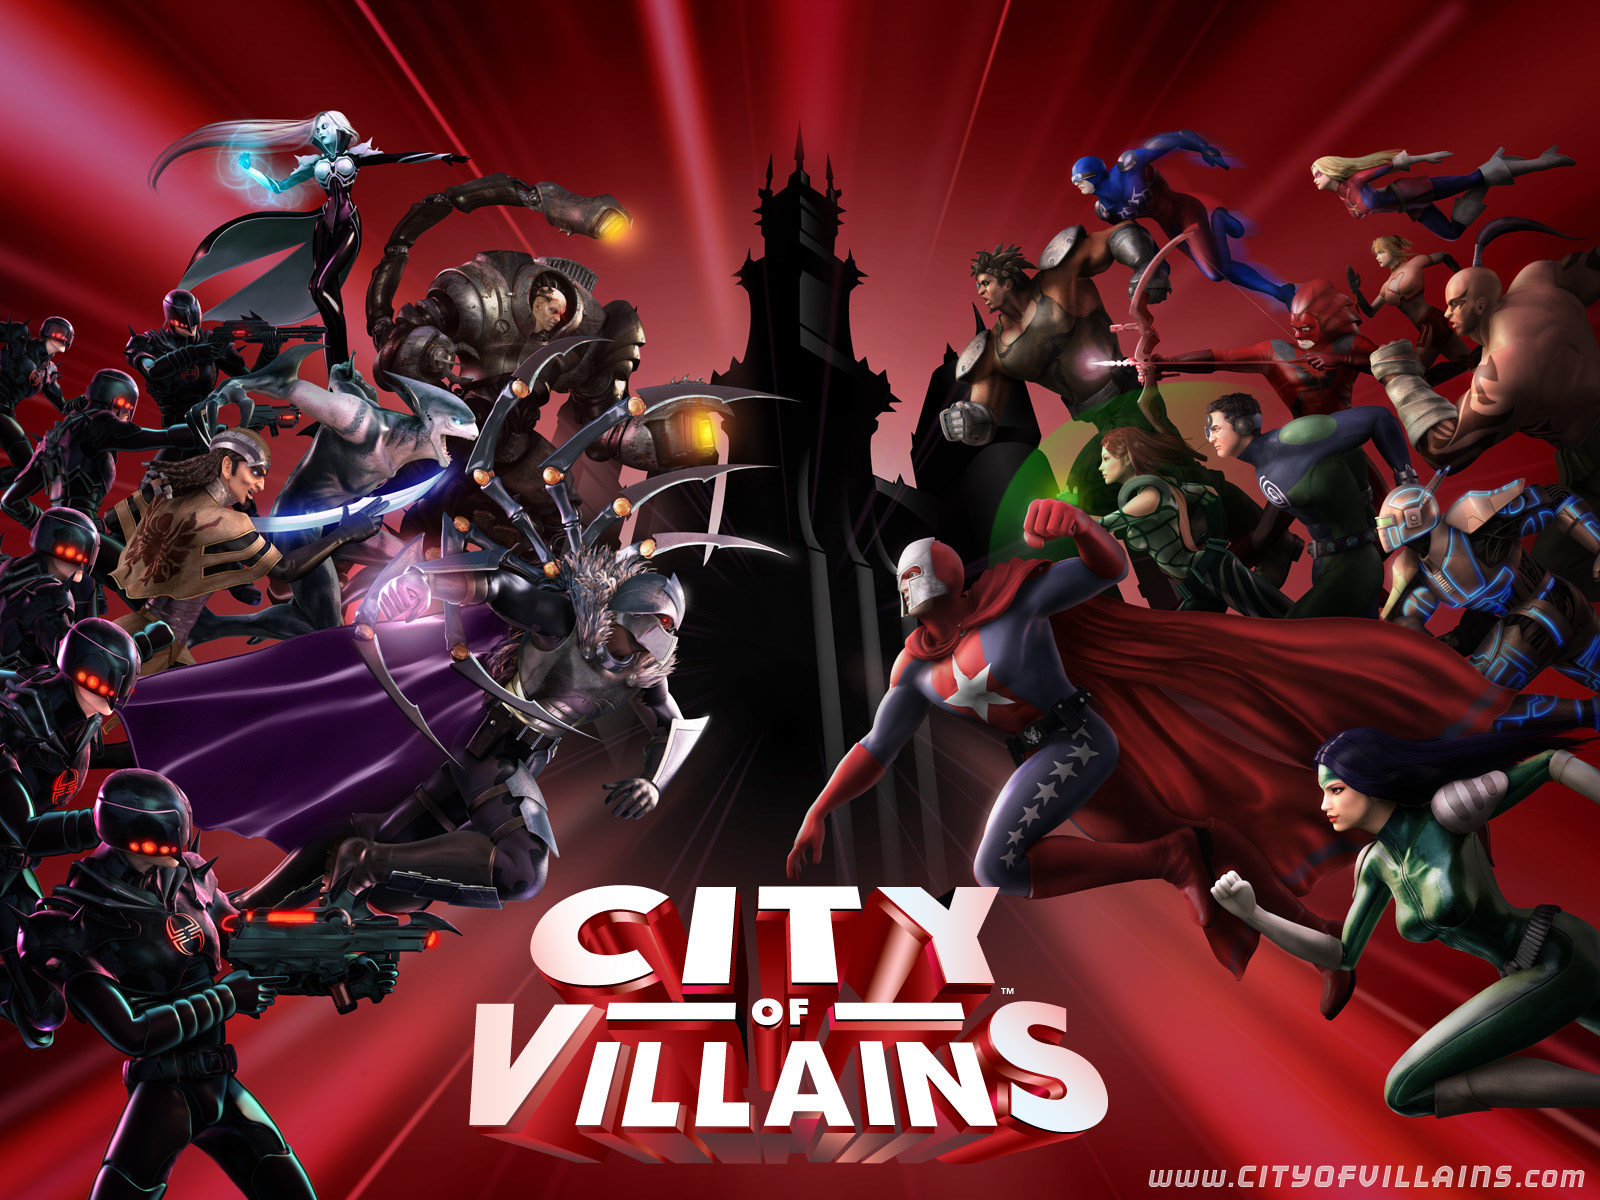 Wallpapers for City of Villains select size 1600x1200 1280x1024